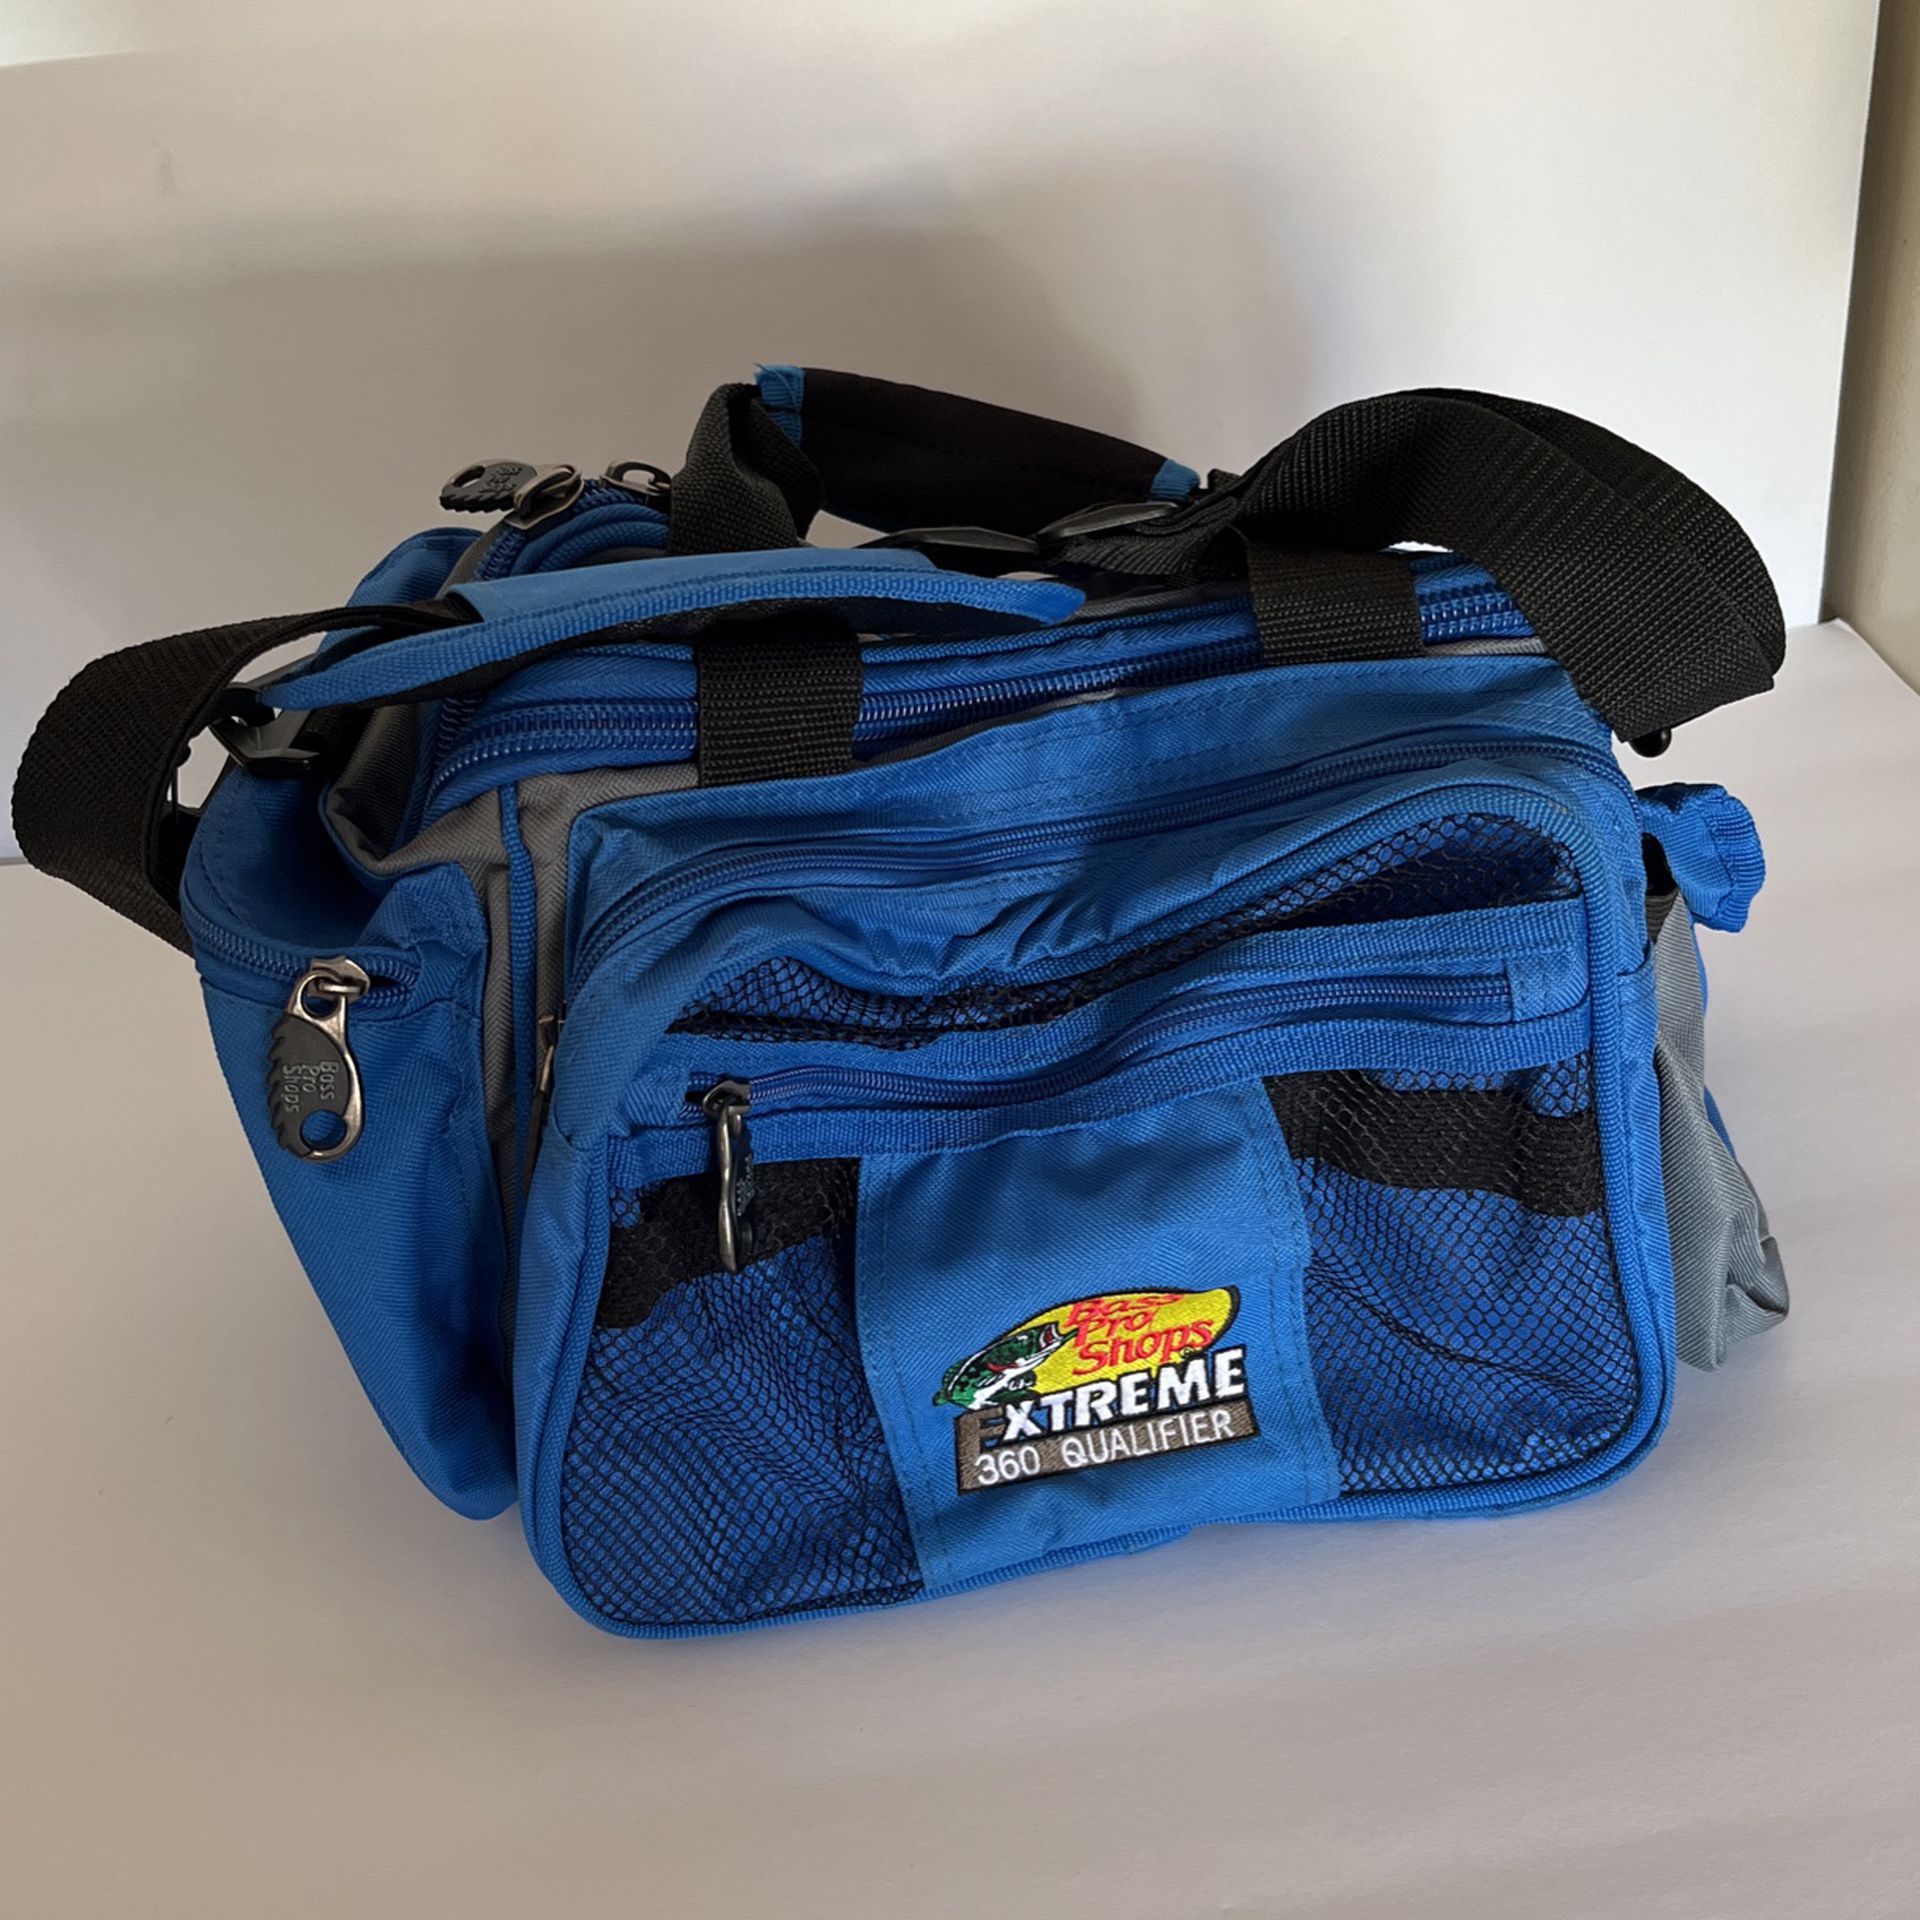 Bass Pro Shops 360 Tackle Bag for Sale in Elk Grove, CA - OfferUp